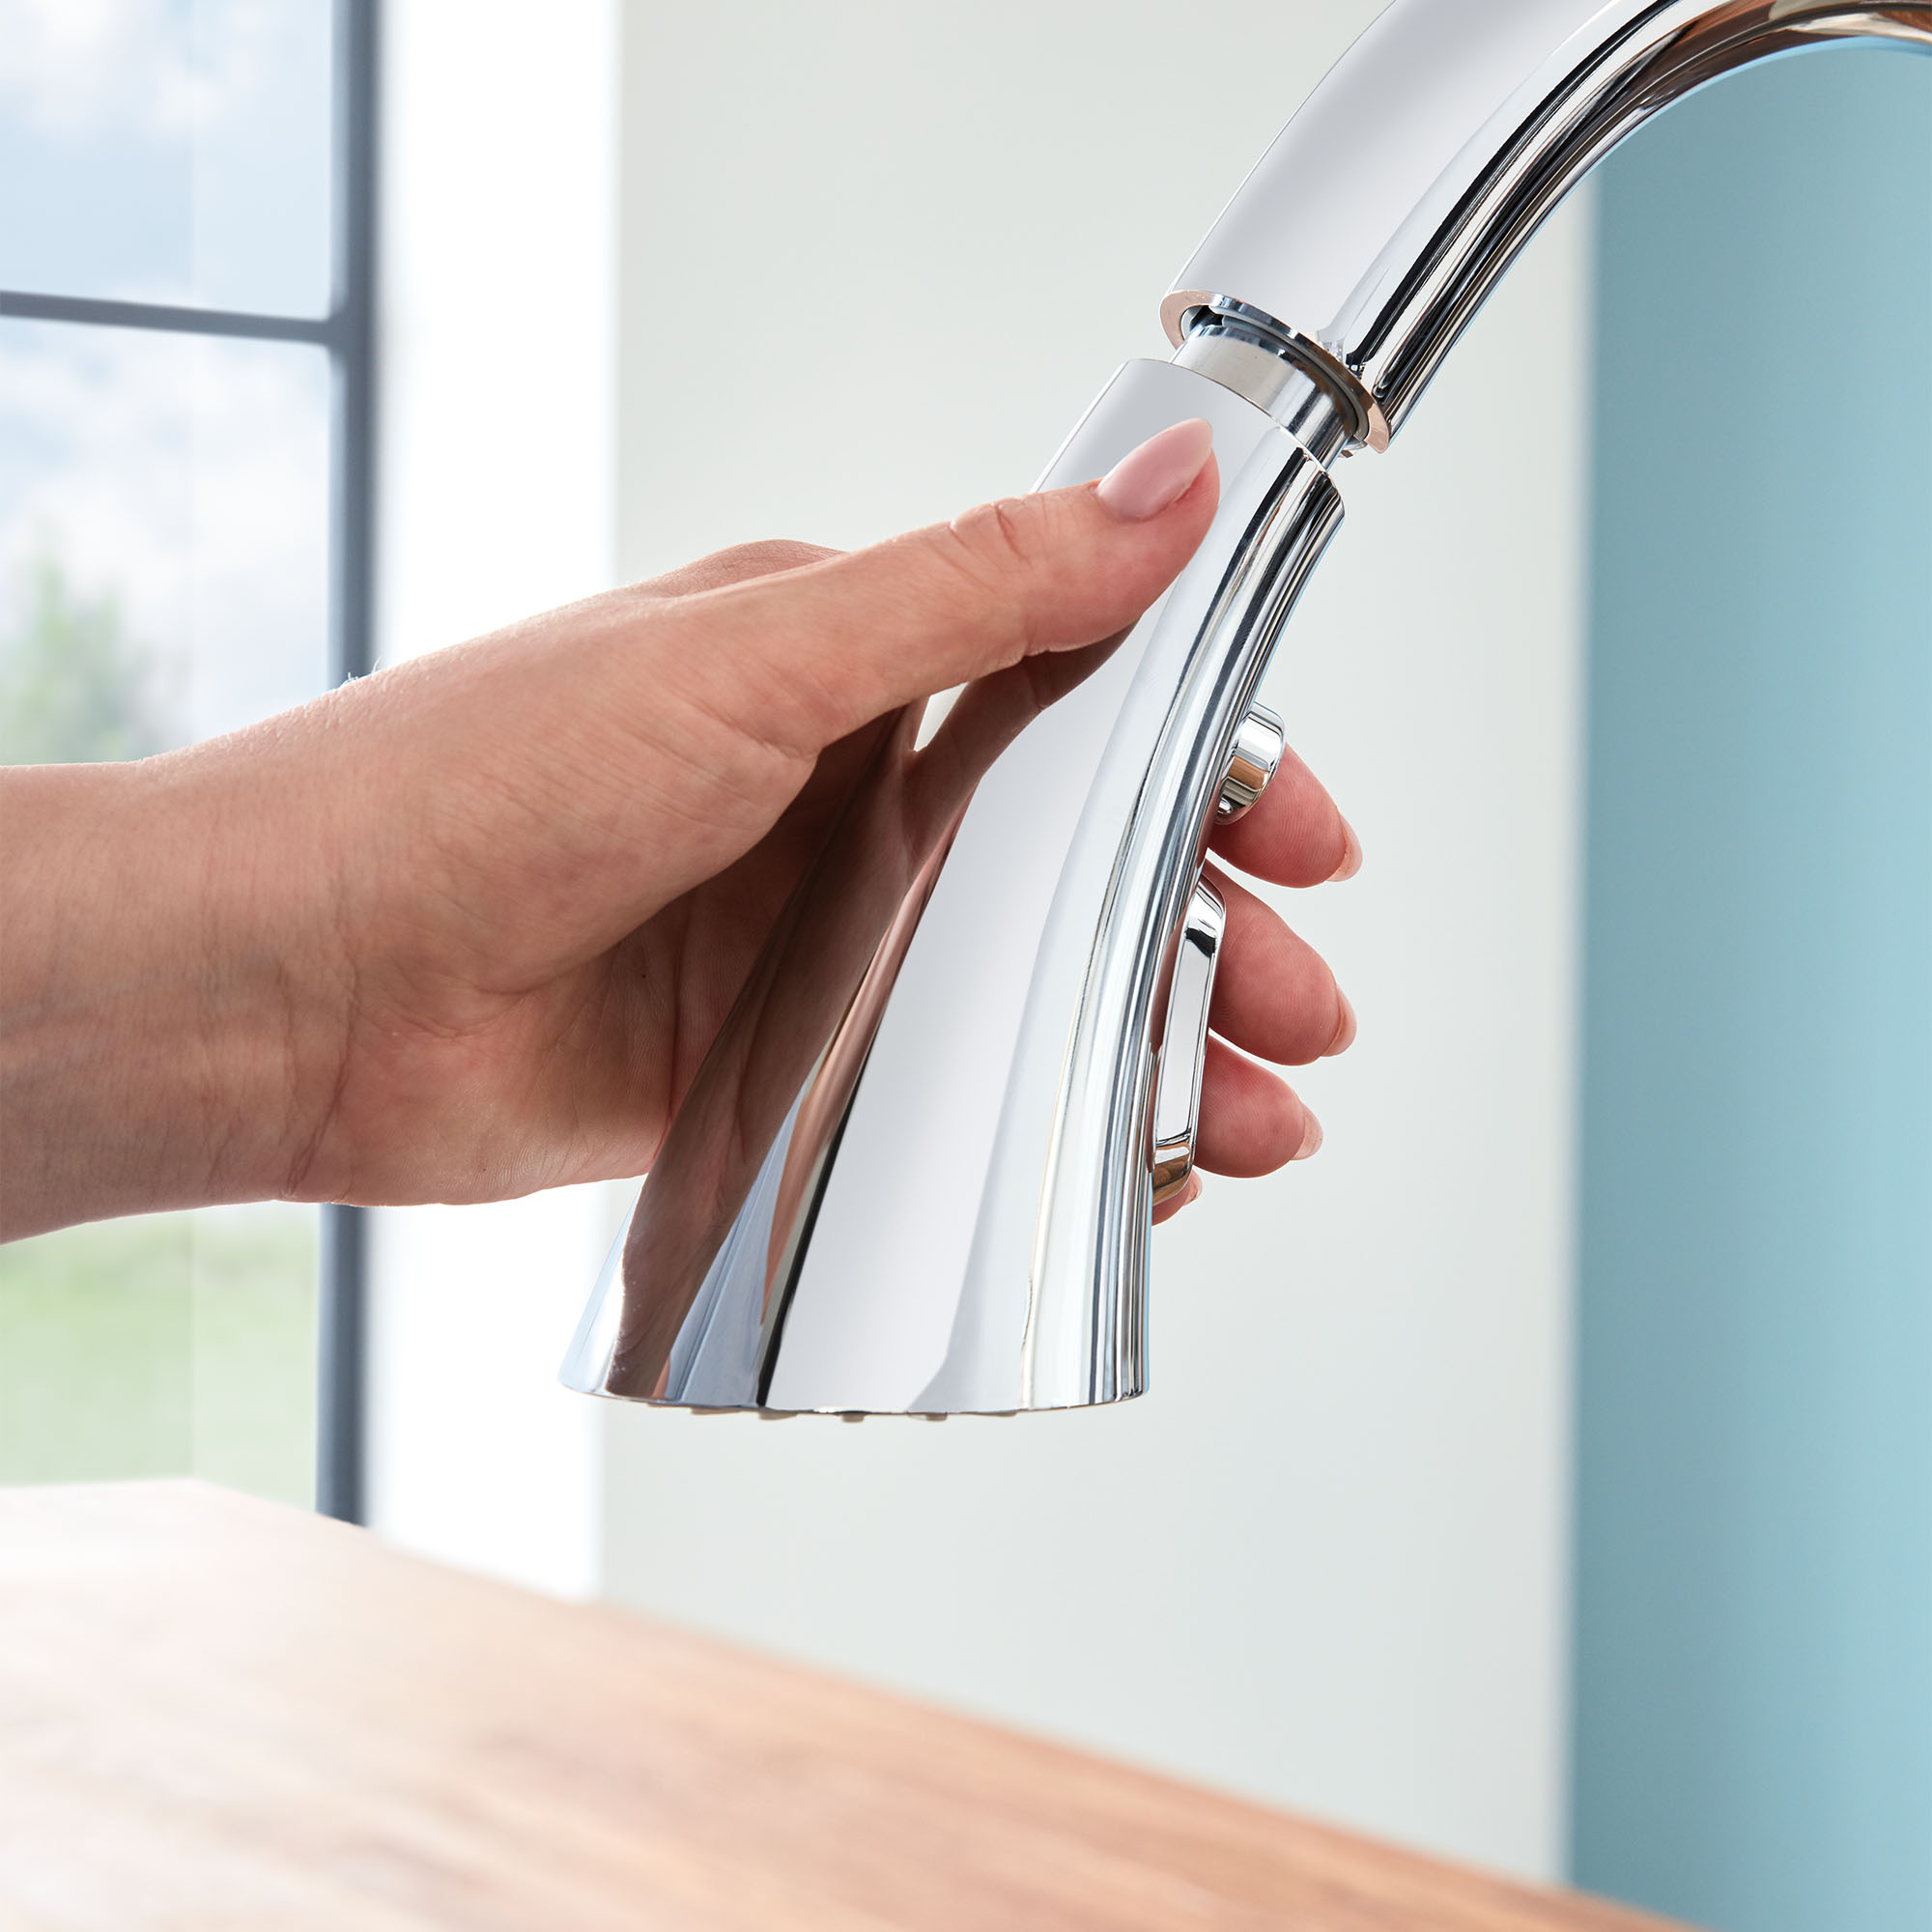 Single-Handle Pull Down Kitchen Faucet Triple Spray 6.6 L/min (1.75 gpm) with
Touch Technology